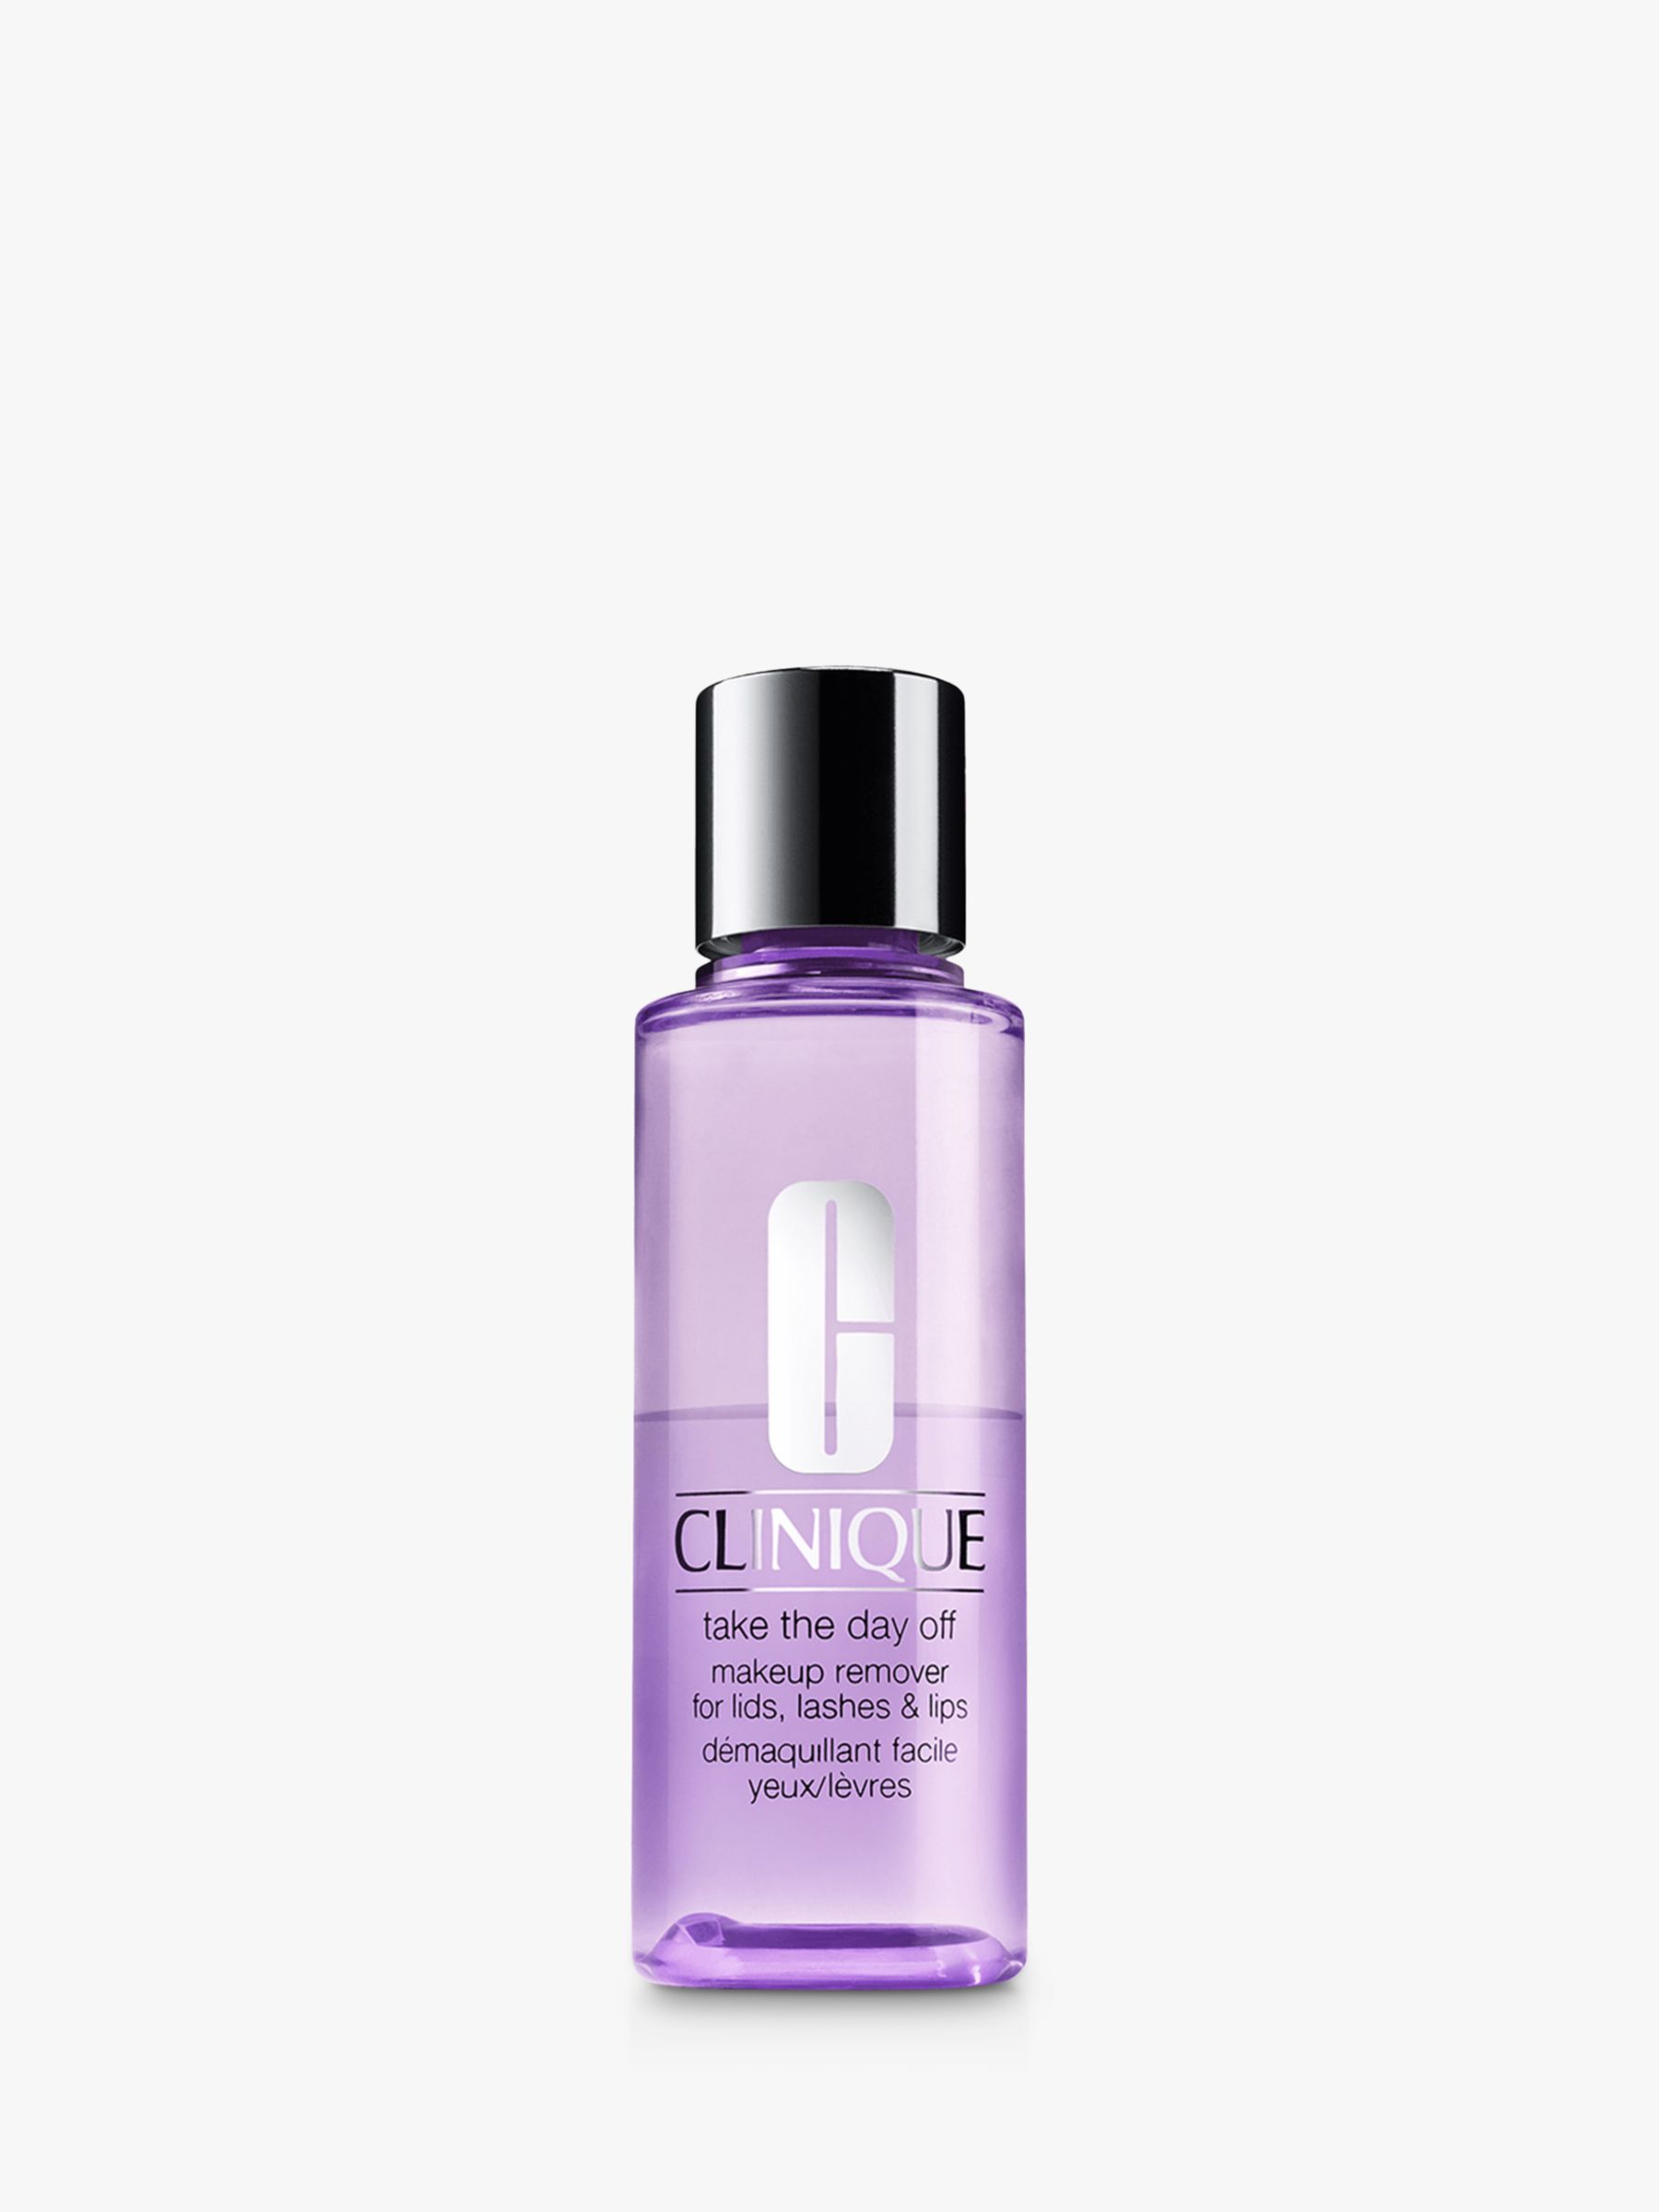 Clinique Take The Day Off Makeup Remover For Lids, Lashes & Lips - All Skin Types, 125ml 1